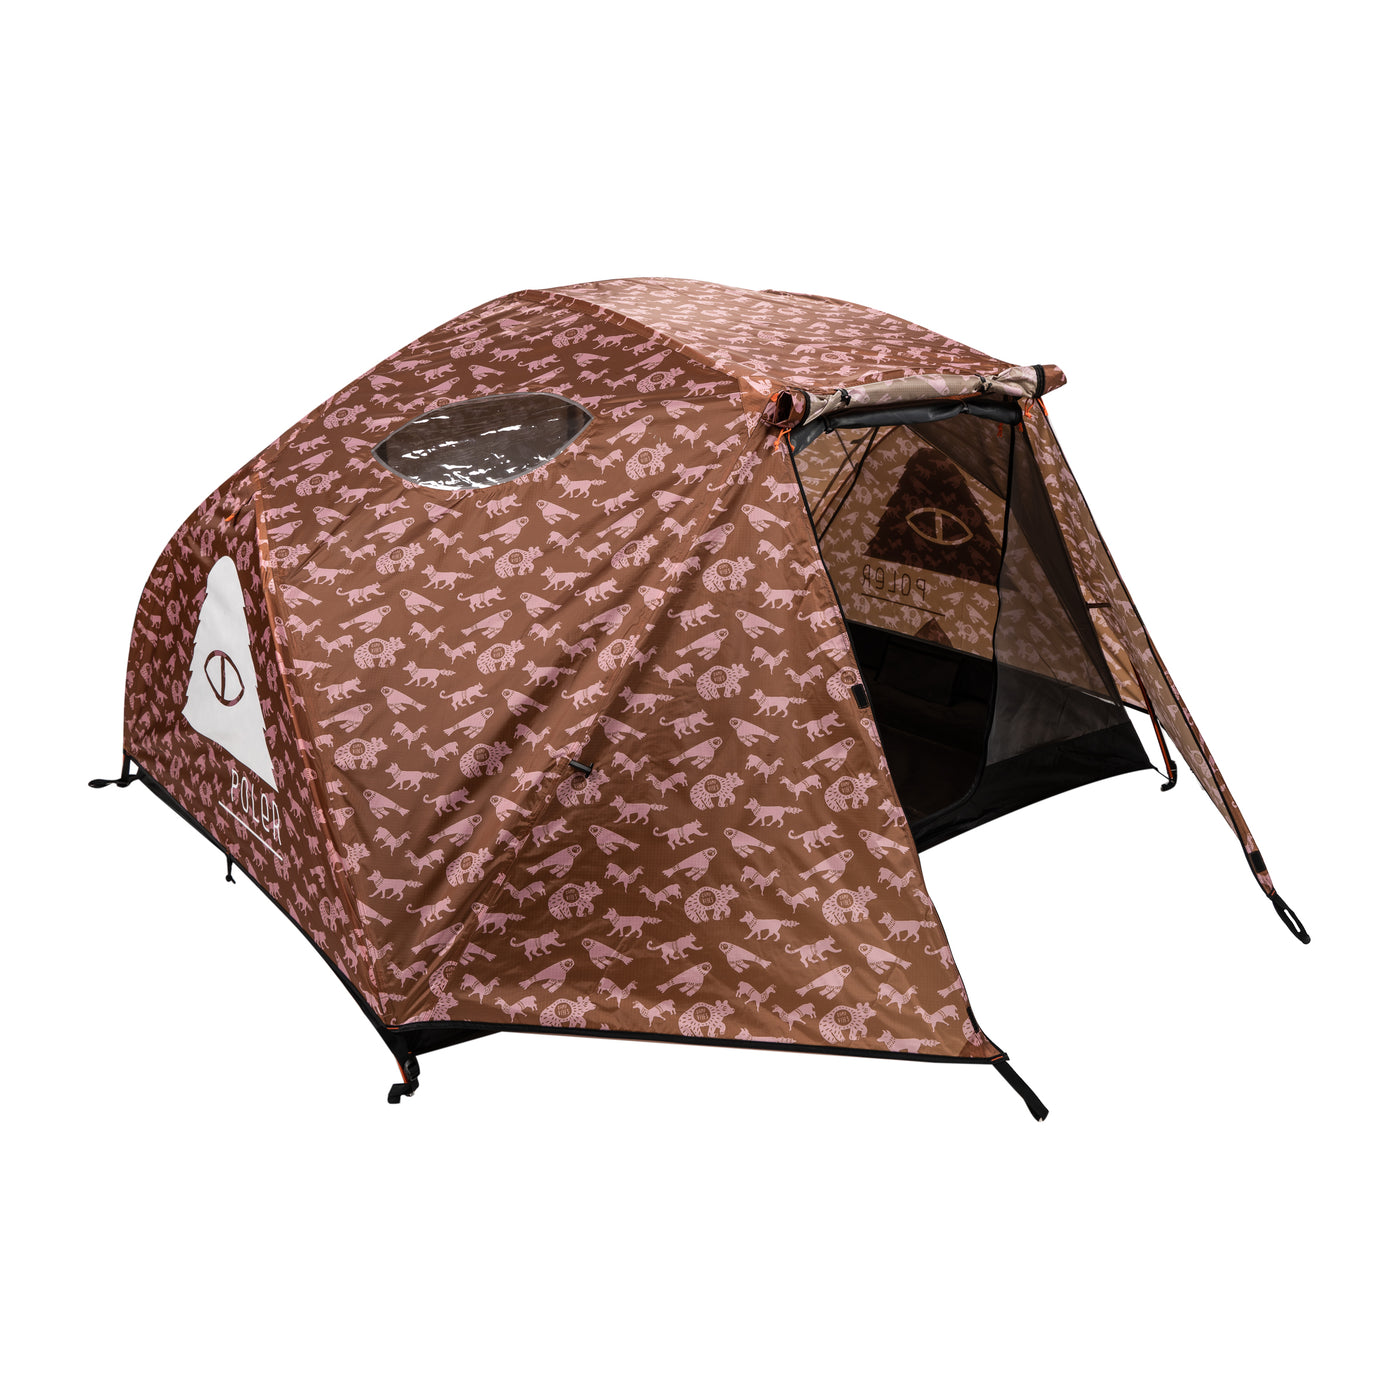 2 Person Tent - Critter Brown  Critter Brown O/S 